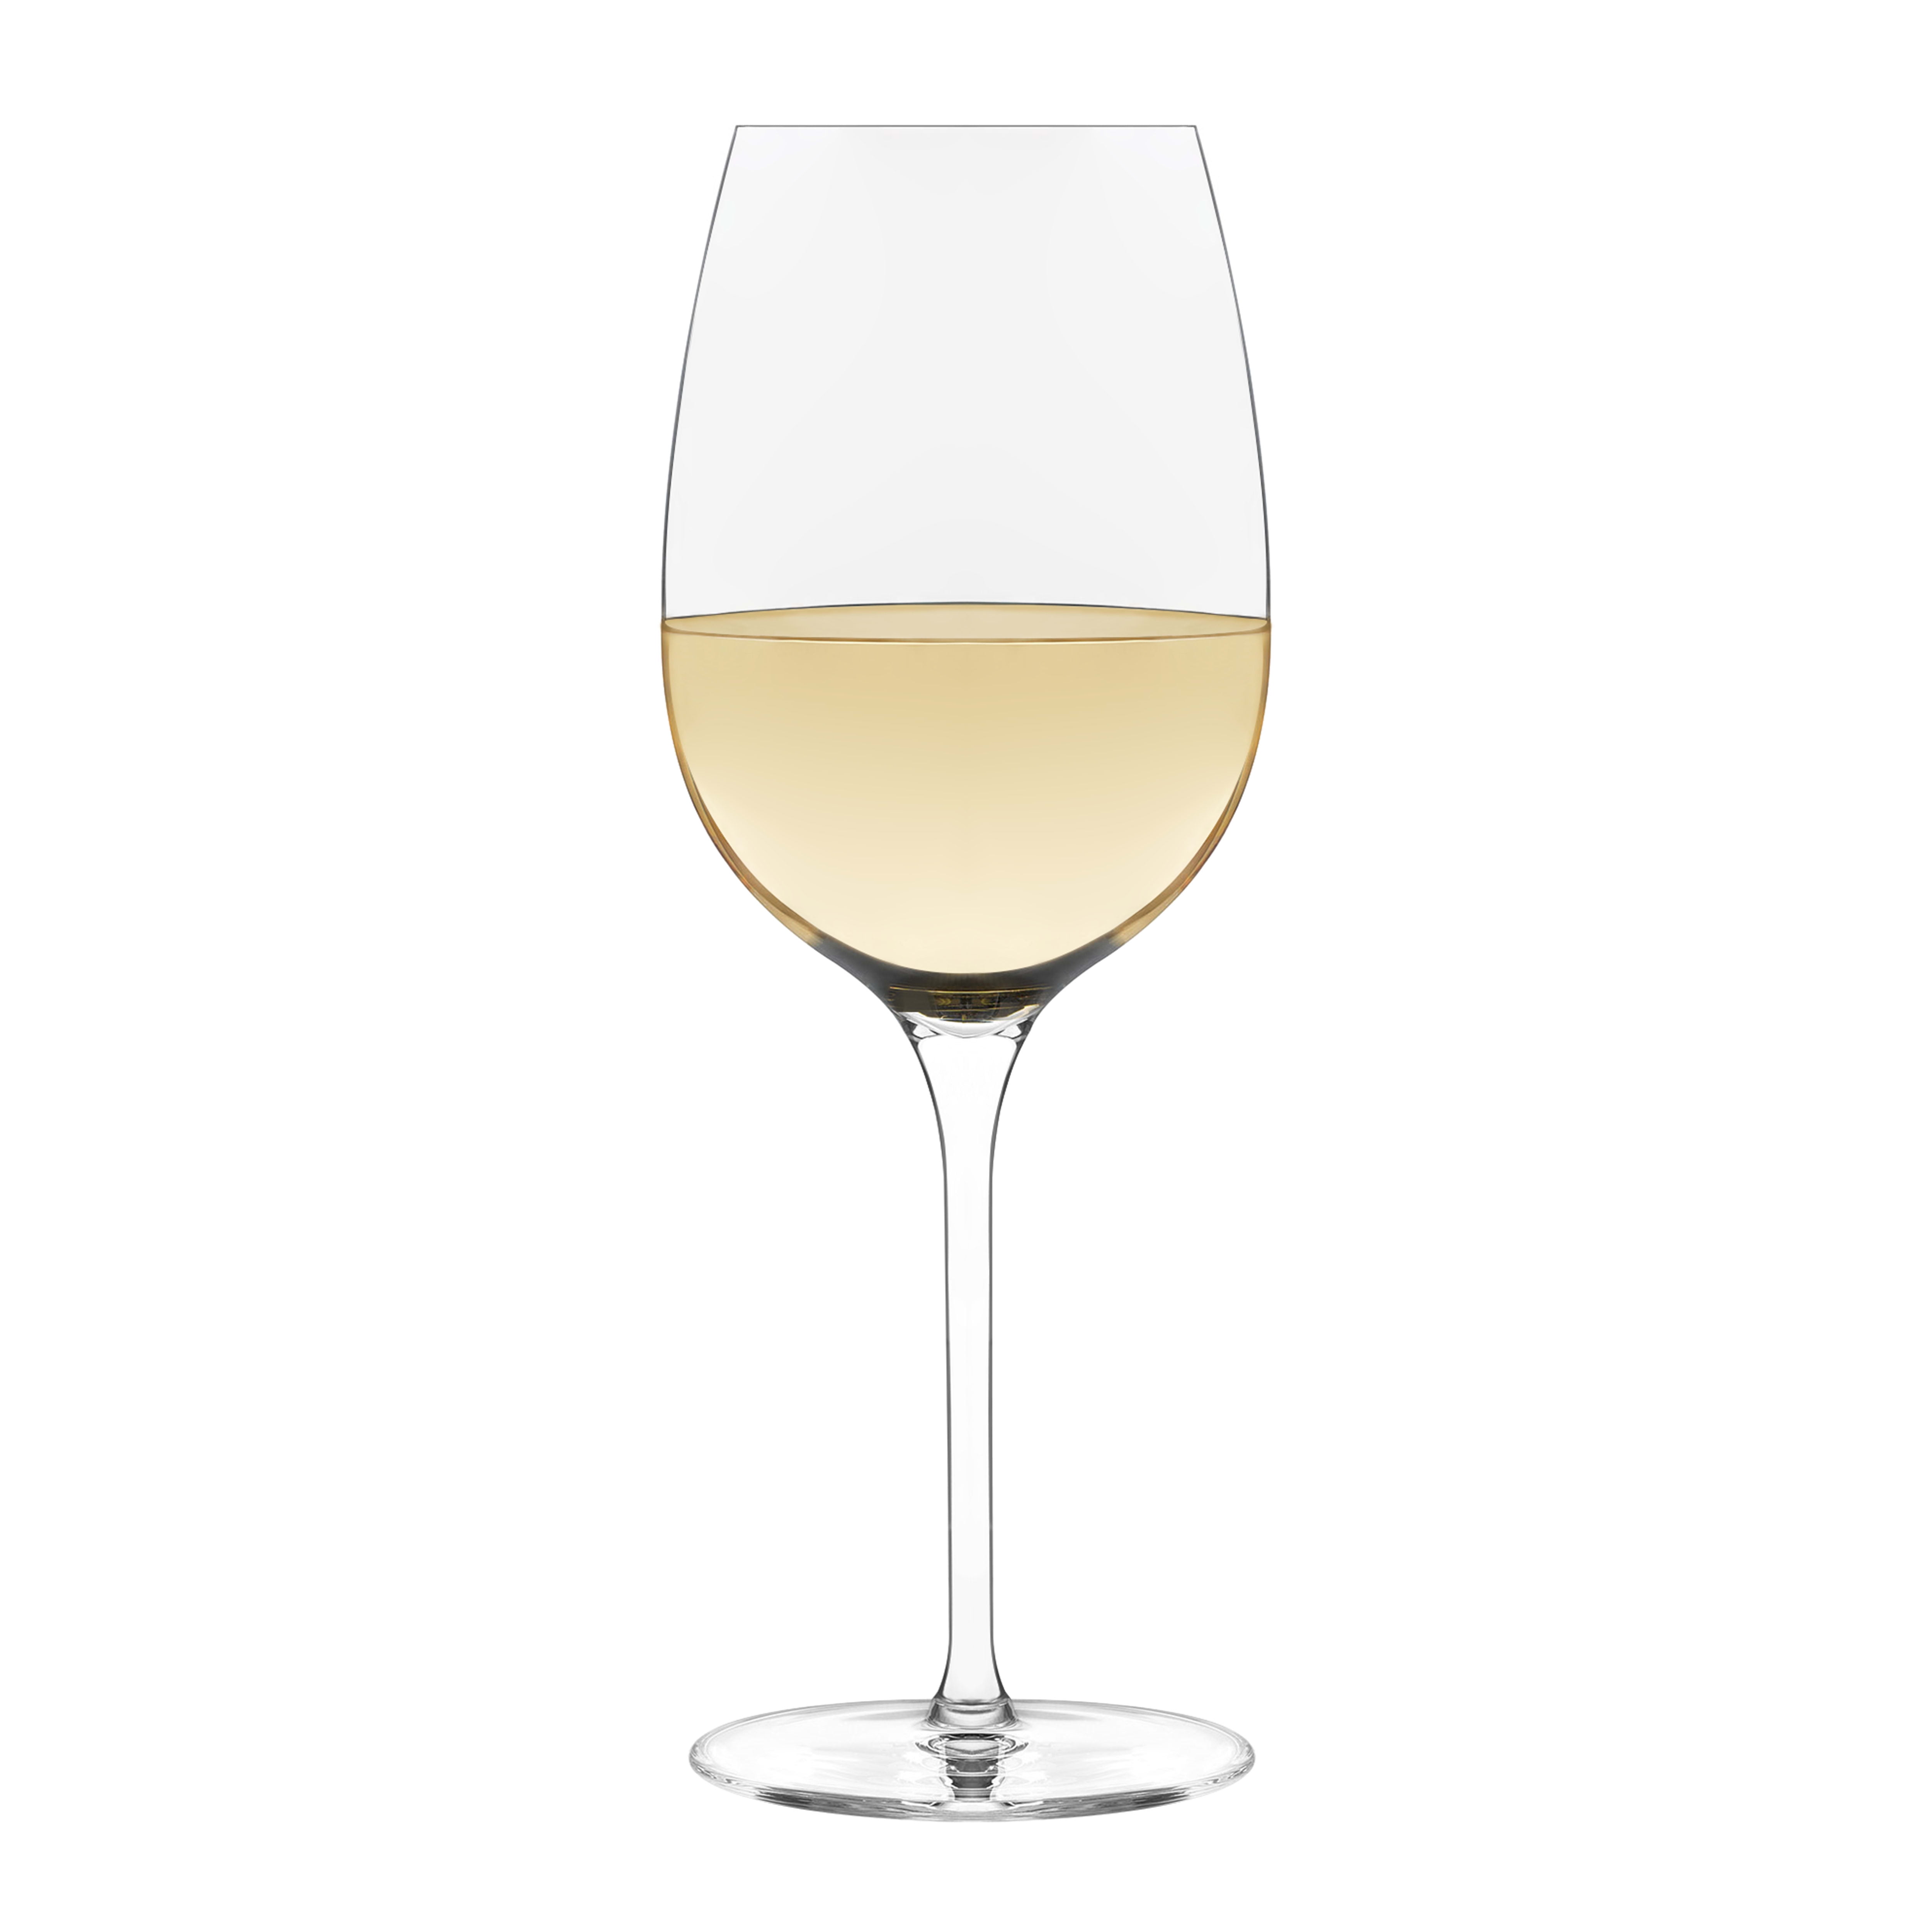 Libbey Midtown White Wine Glasses, Set of 4 - Bed Bath & Beyond